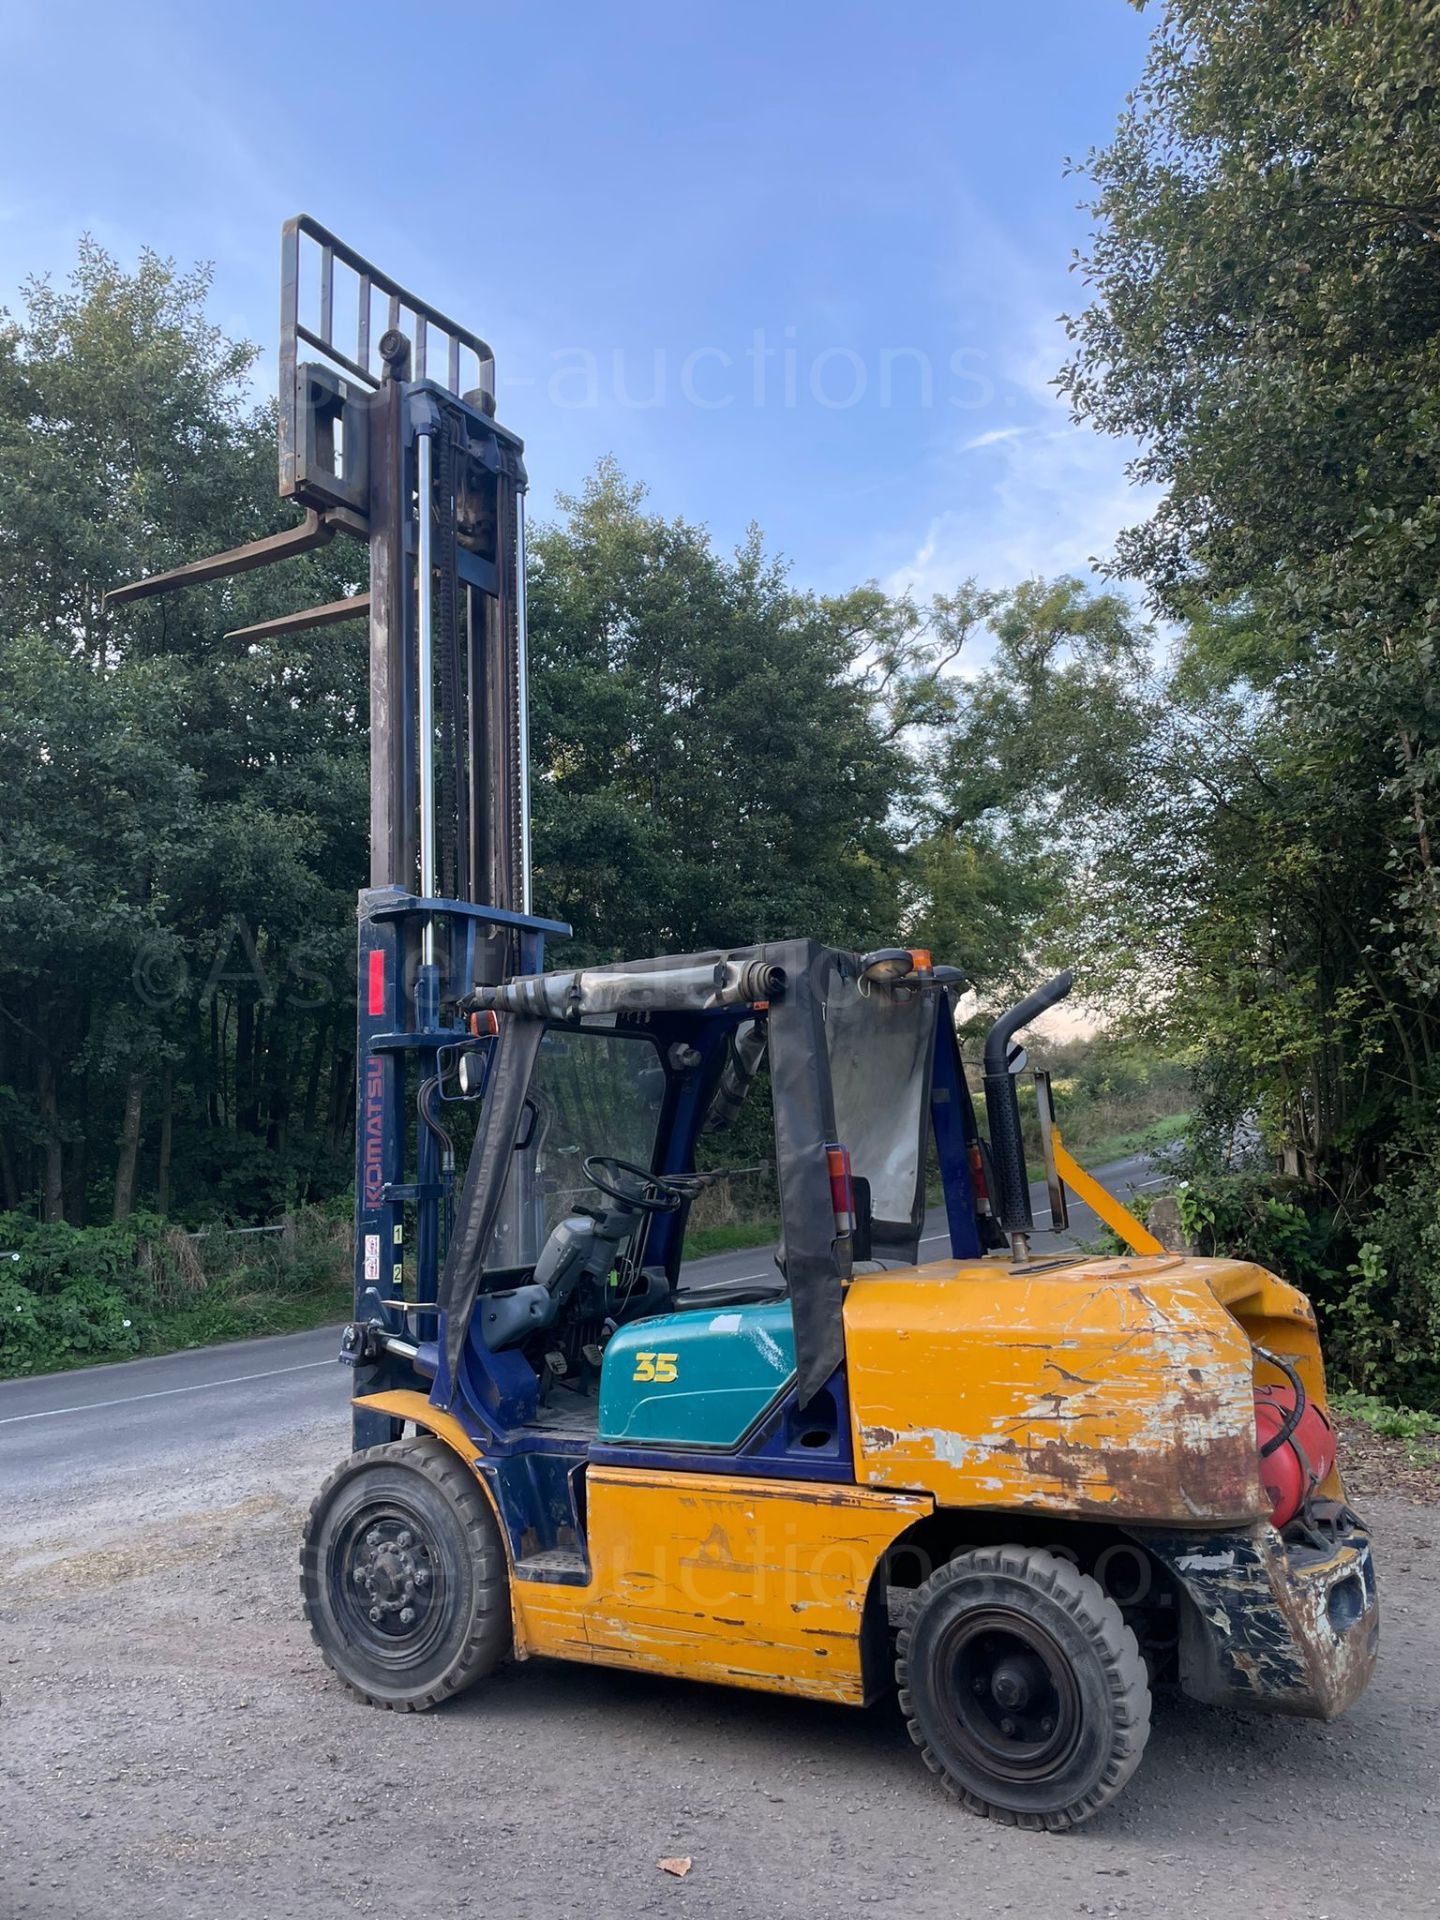 KOMATSU 3.5 TON FORKLIFT, 2 STAGE MAST, SIDE SHIFT, RUNS WORKS AND DRIVES, STILL IN DAILY USE - Image 6 of 10